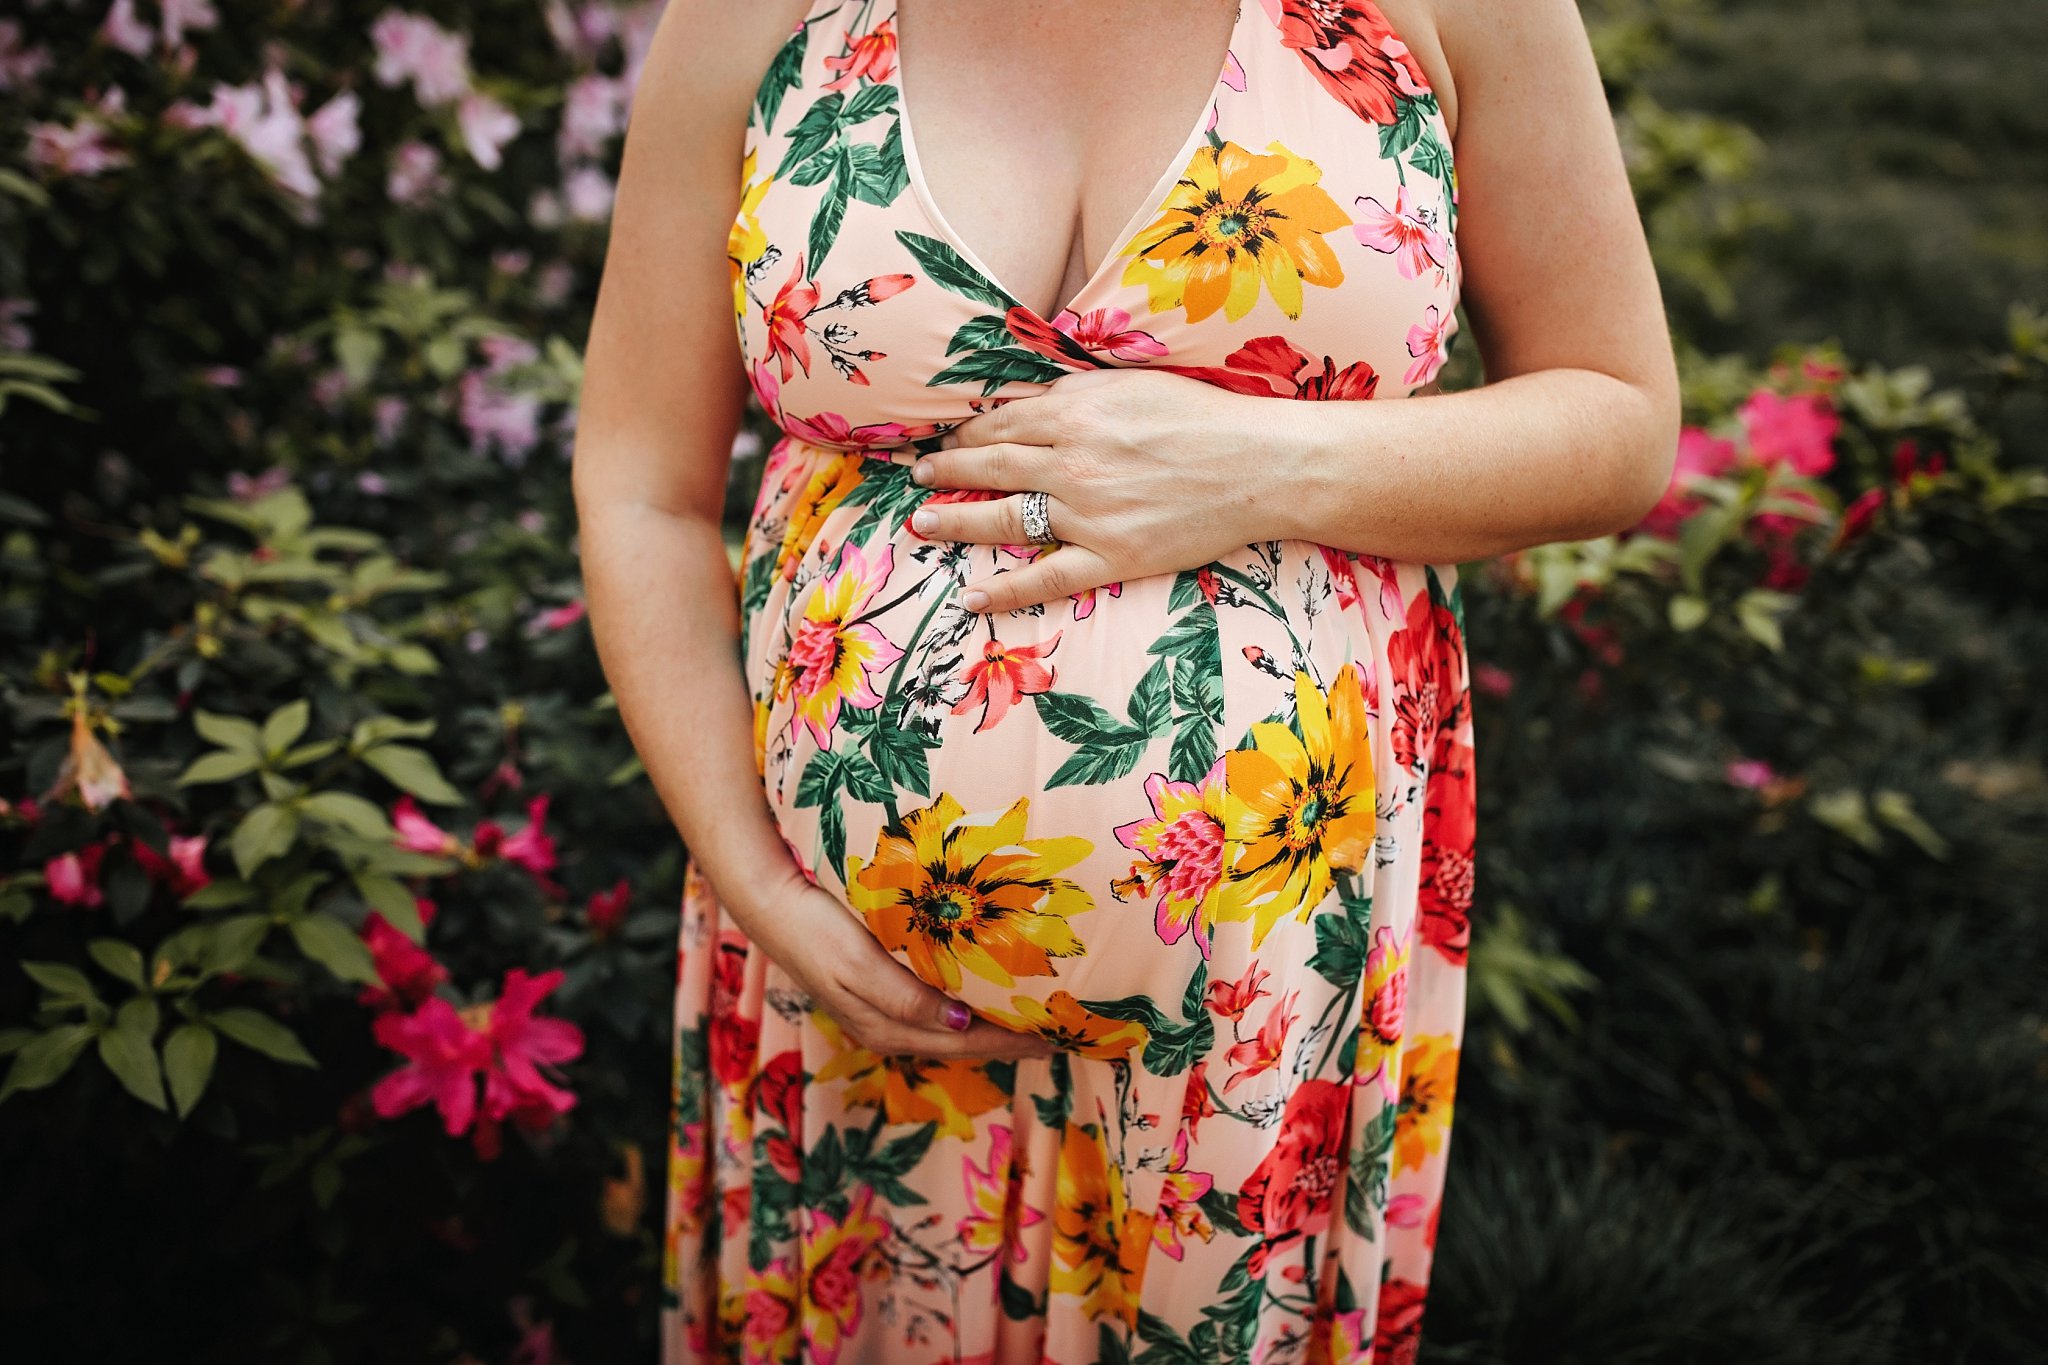 St Augustine Maternity Photographer Washington Oaks Gardens State Park pregnant belly with mom's hands on floral dress